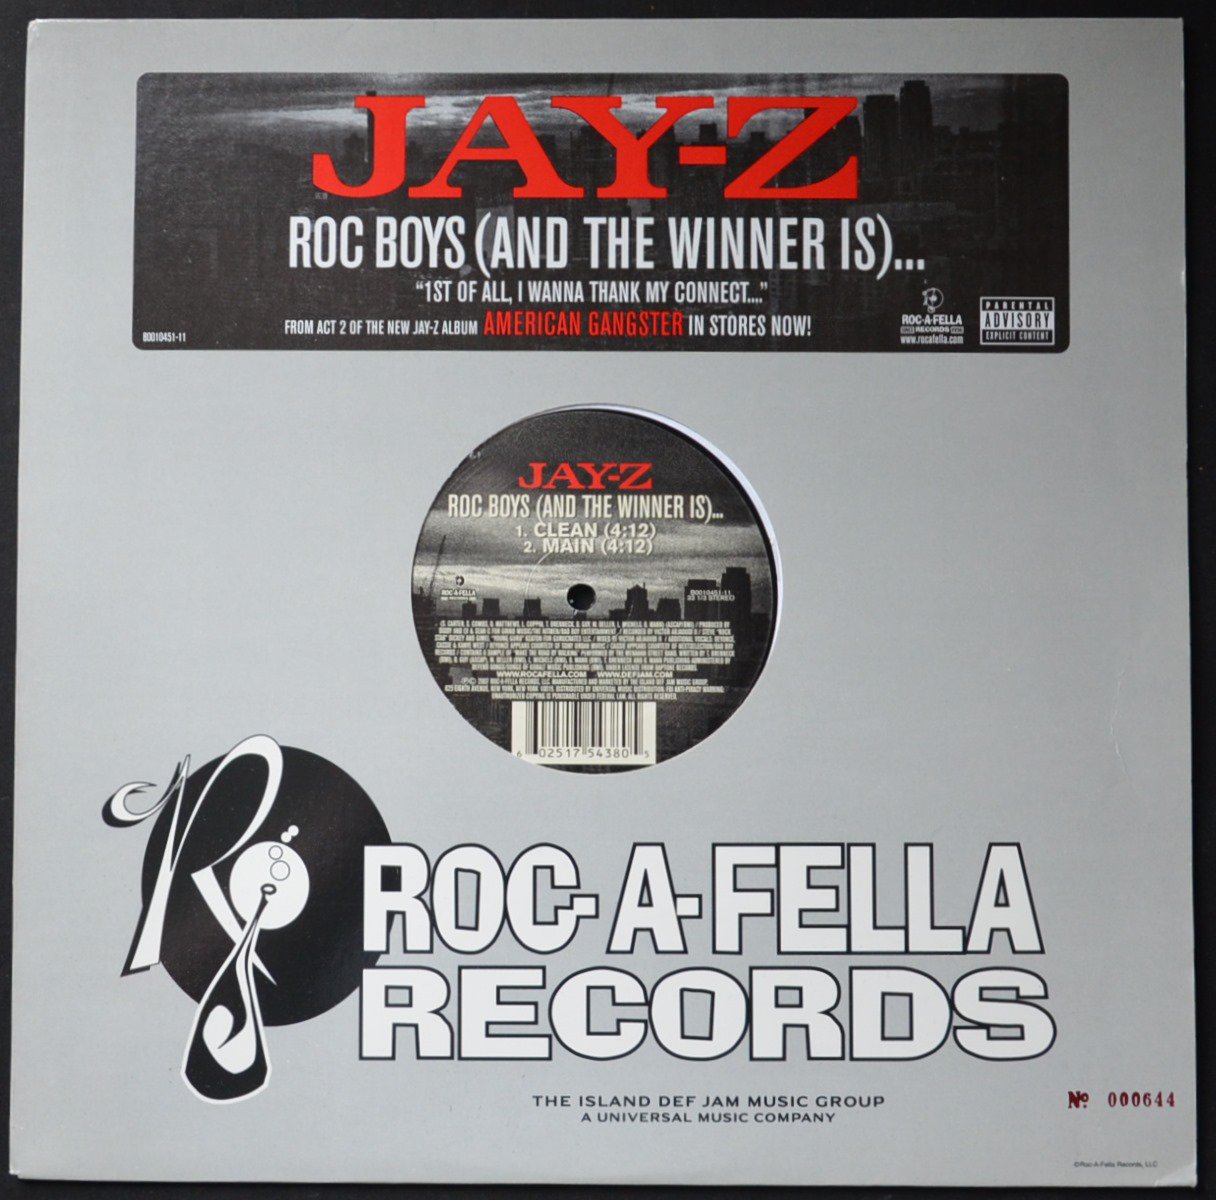 JAY-Z / ROC BOYS (AND THE WINNER IS)... - US LIMITED PRESS (12